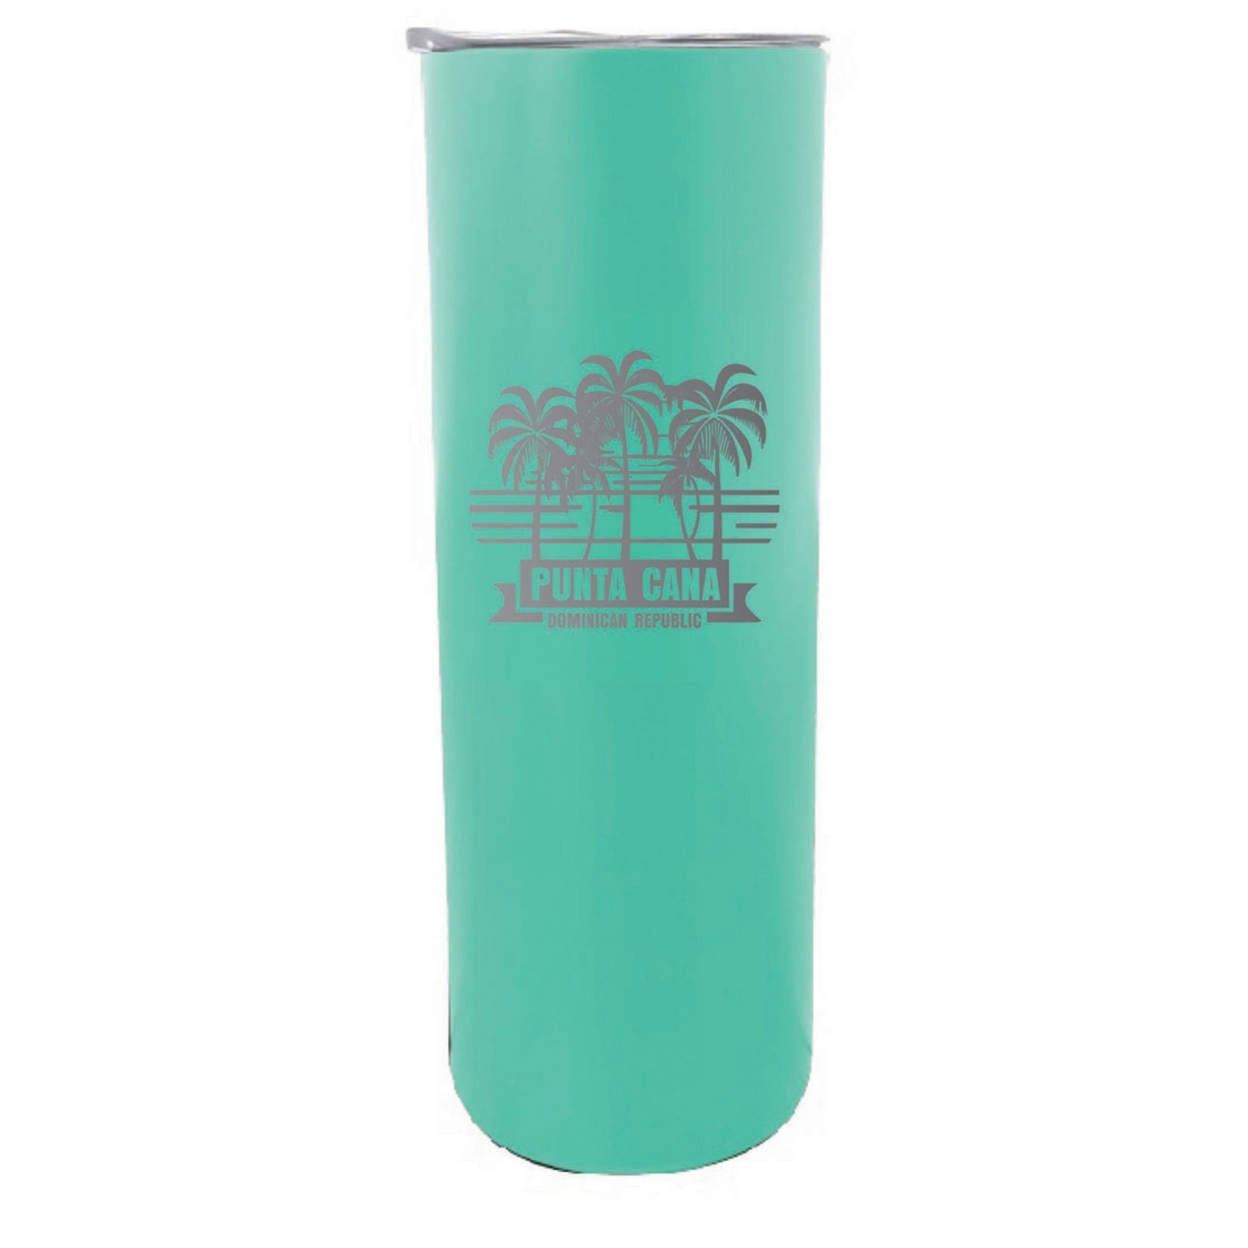 Punta Cana Dominican Republic Souvenir 20 Oz Insulated Stainless Steel Skinny Tumbler Etched - Seafoam, PALM BEACH